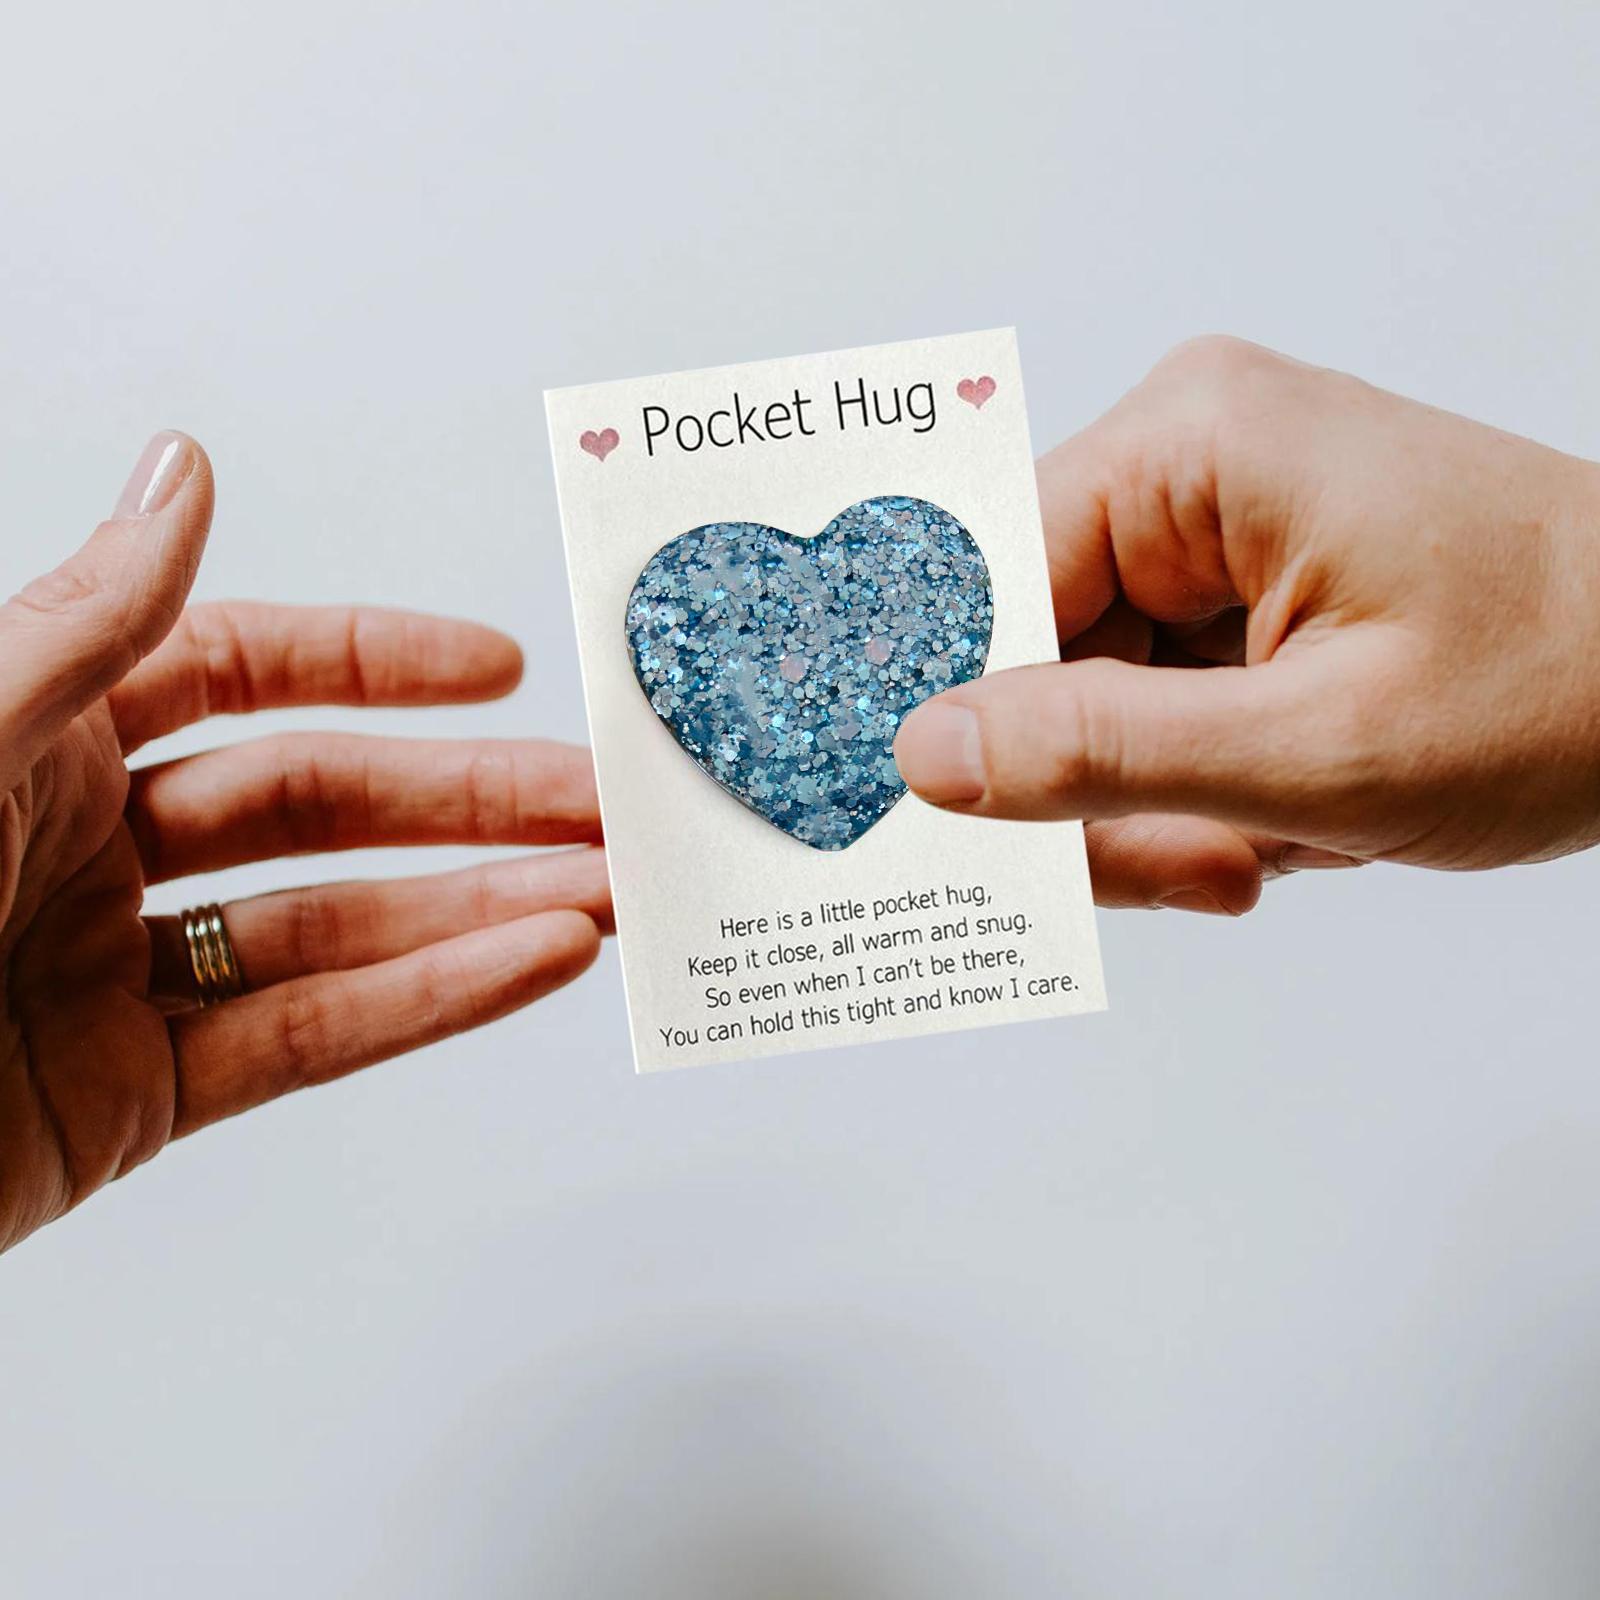 Pocket Hug Heart Token with Greeting Card Mini Cute Pocket Hug Decoration Keepsake Cheer up Gifts for Friends Colleagues Family - image 3 of 5